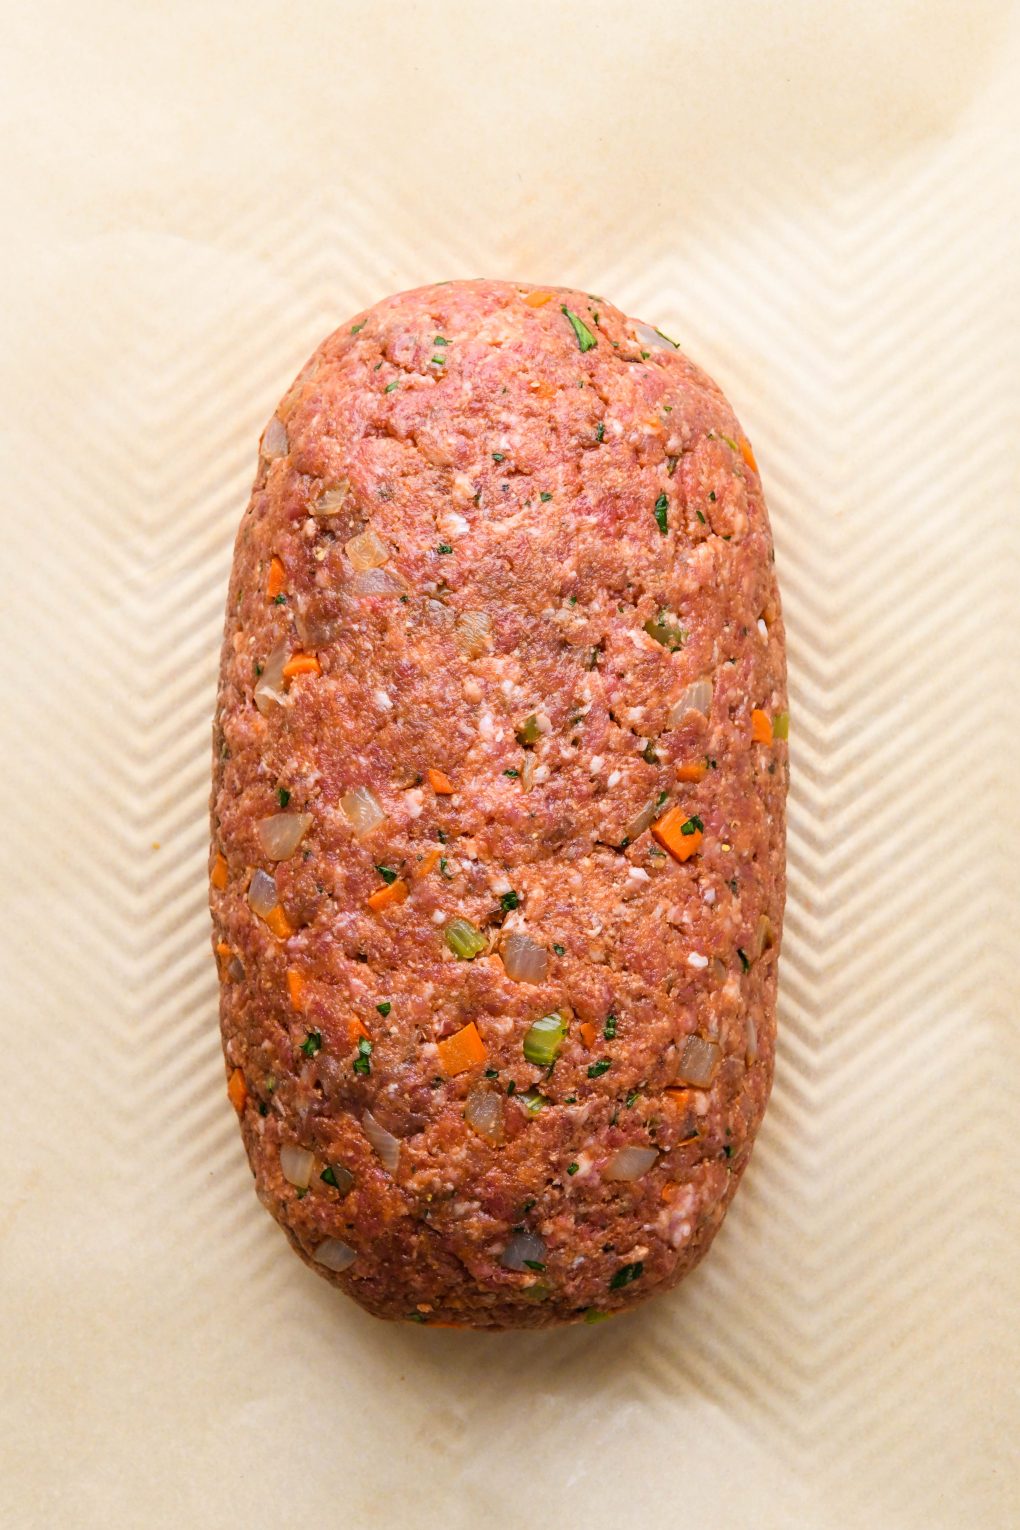 How to make classic Whole30 meatloaf: Raw meatloaf mixture formed into a loaf on a parchment lined baking sheet.